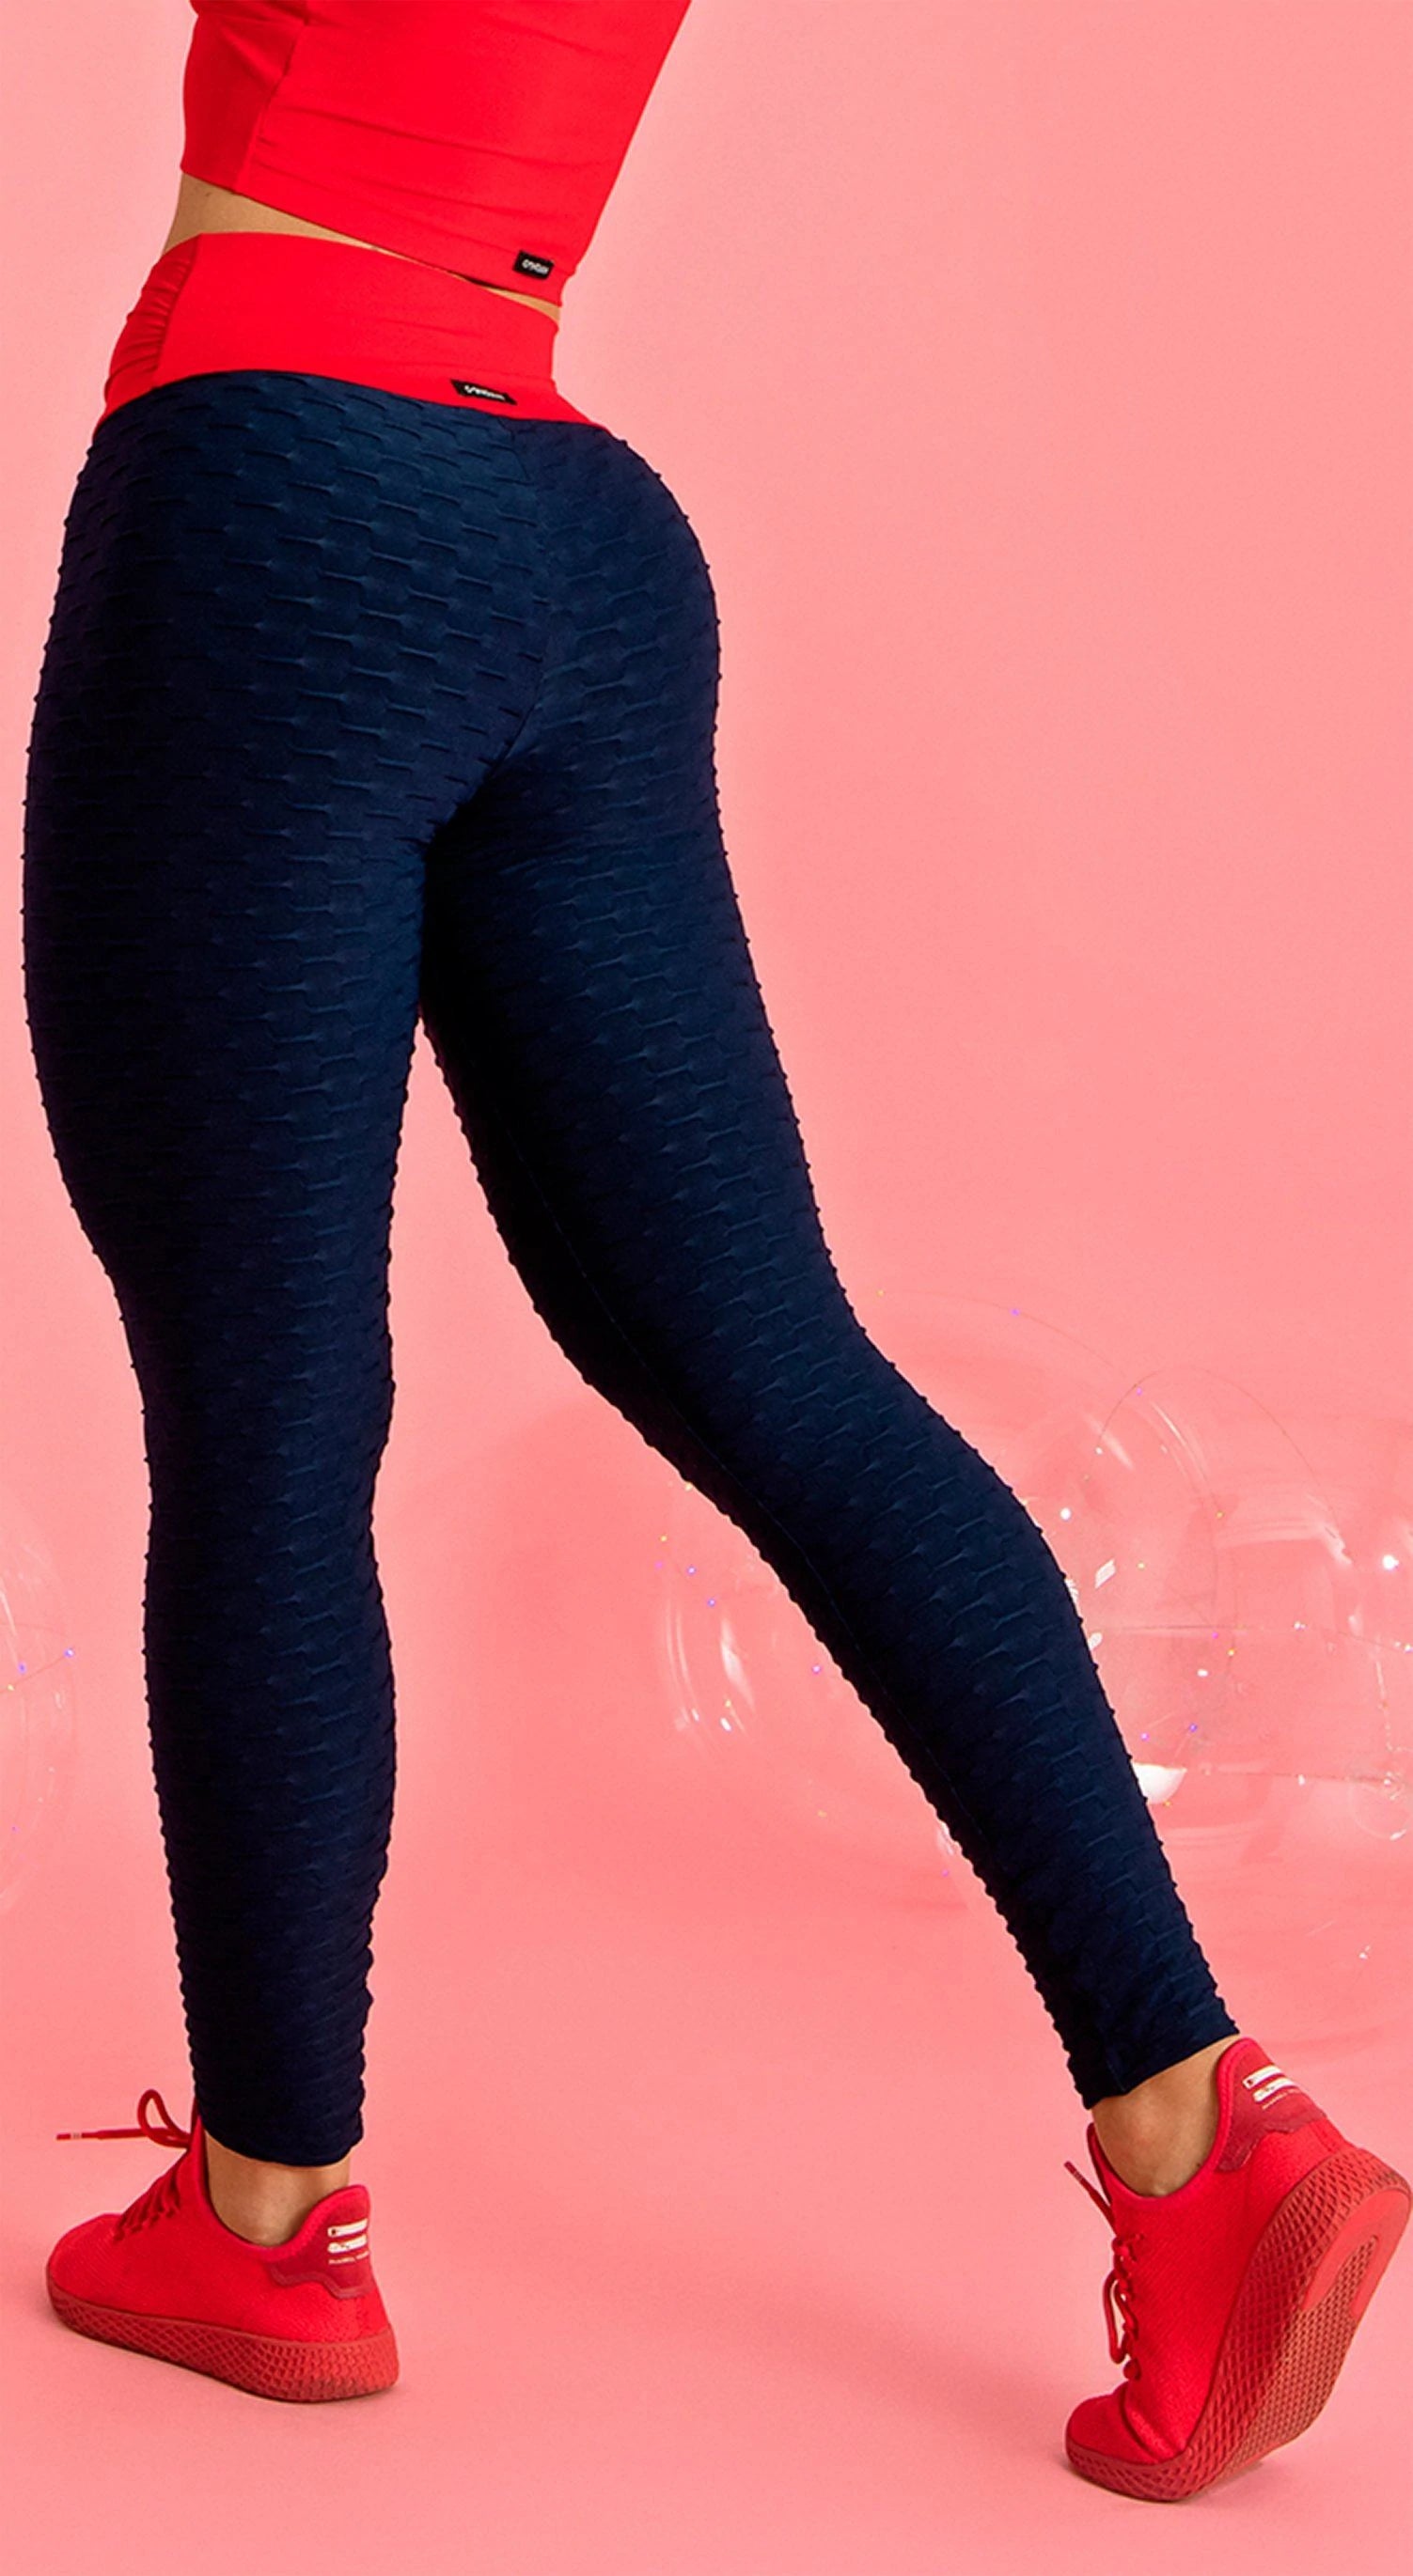 Anti-Cellulite with Dream Effect Leggings by Canoan in Navy – Sexy